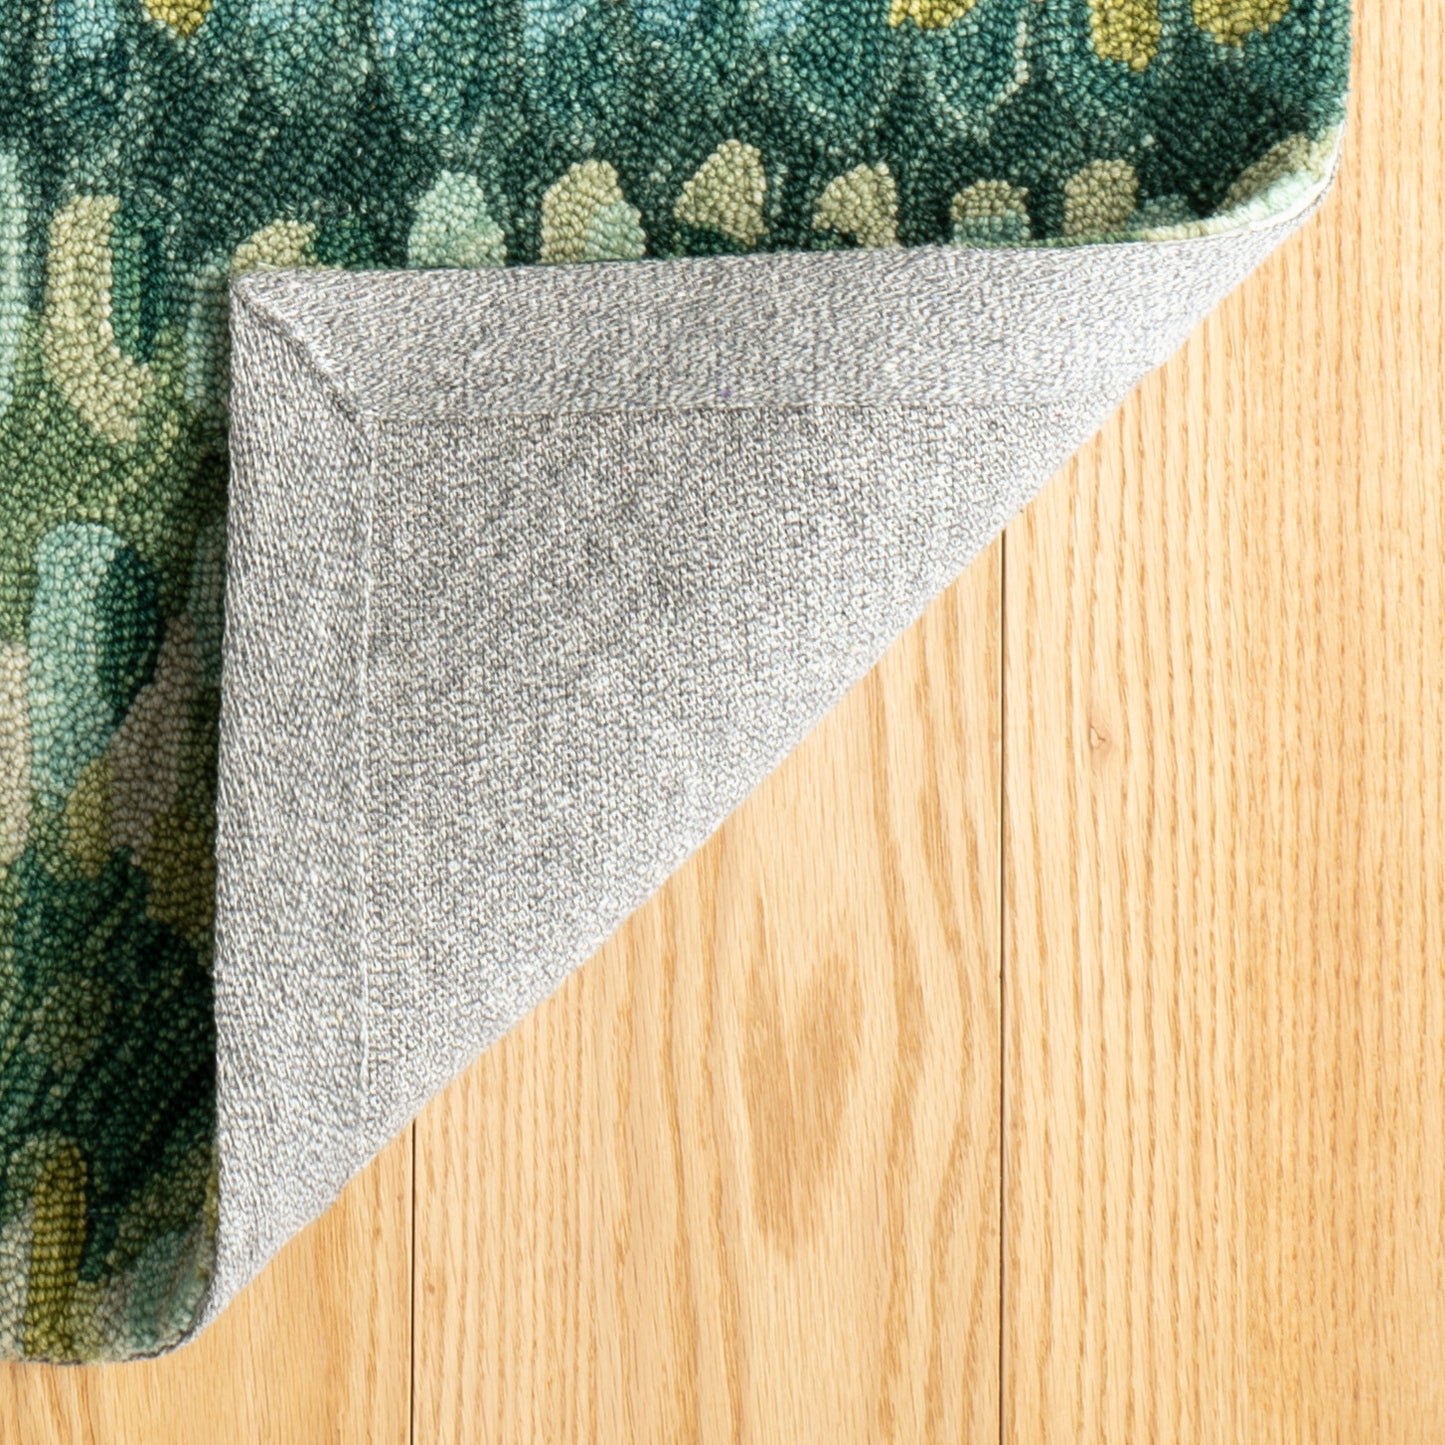 Rug - Micro Hooked Wool - Paint Chip Moss